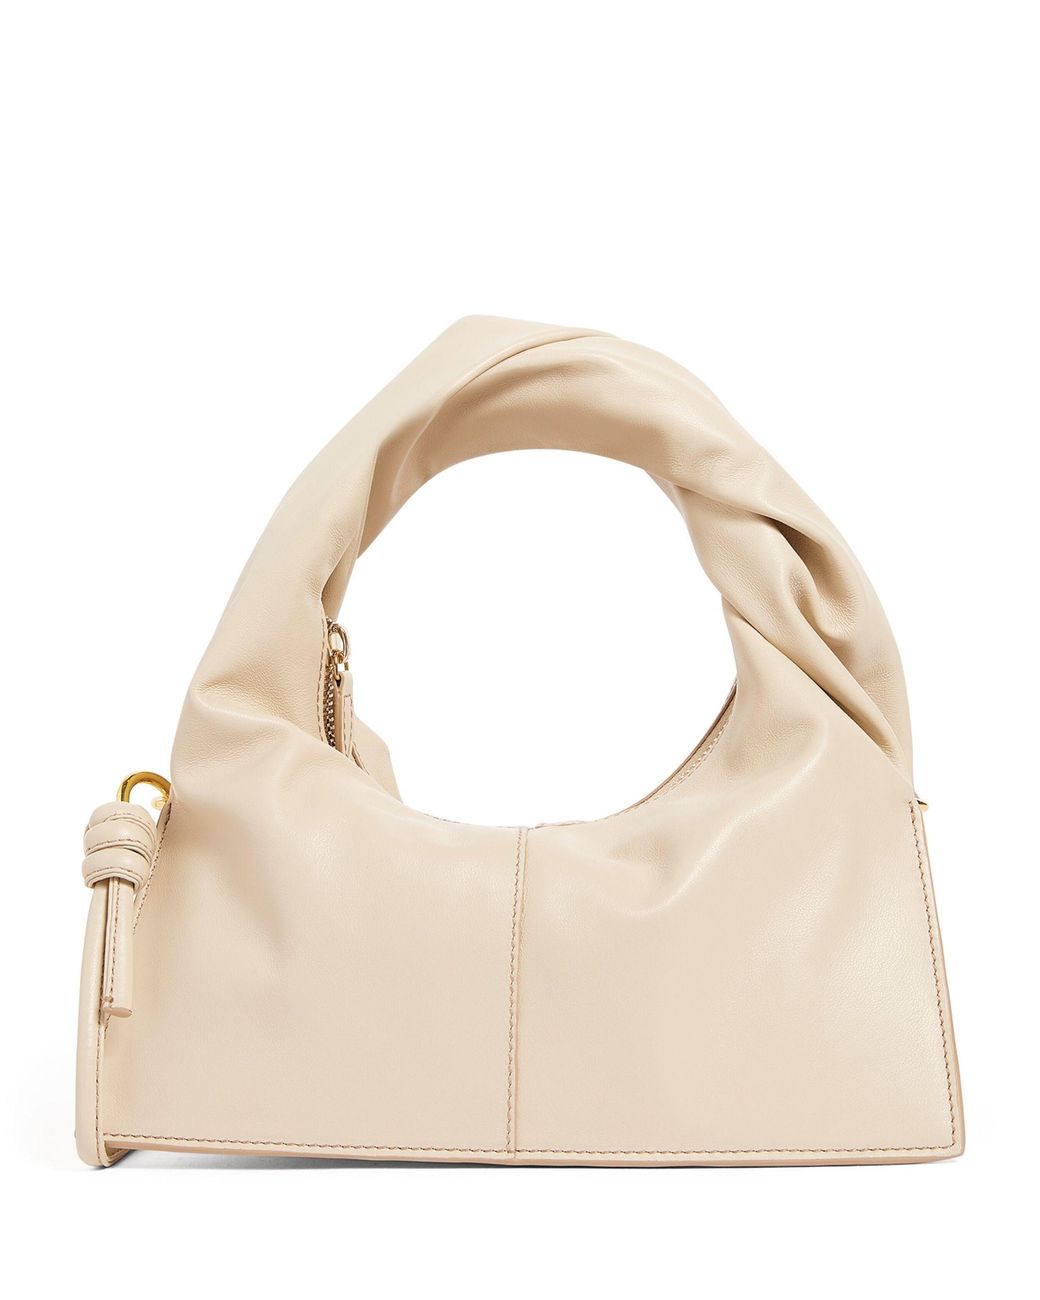 Yuzefi Leather Wonton Top-handle Bag in Beige (Natural) | Lyst